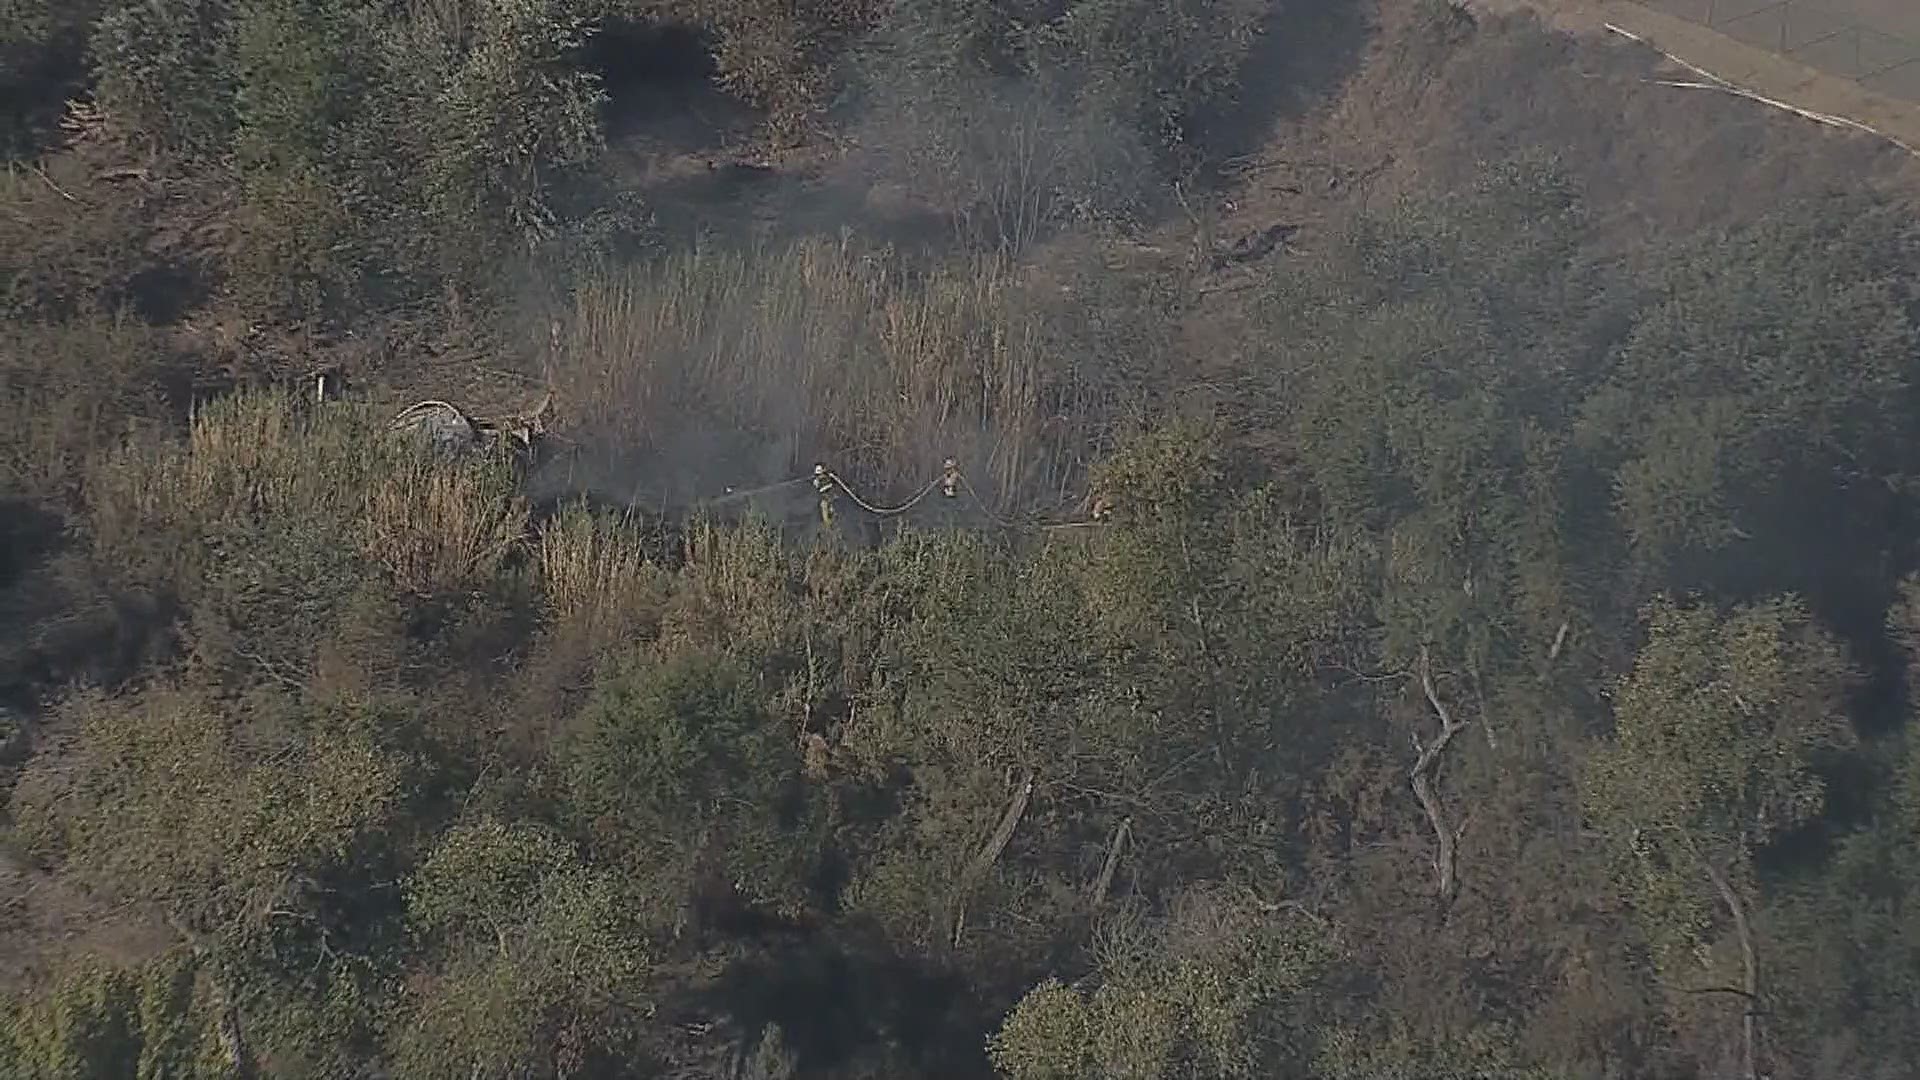 Crews make quick work of a brush fire that broke out early Monday morning in the 10000 block of Channel Road, according to the California Highway Patrol.